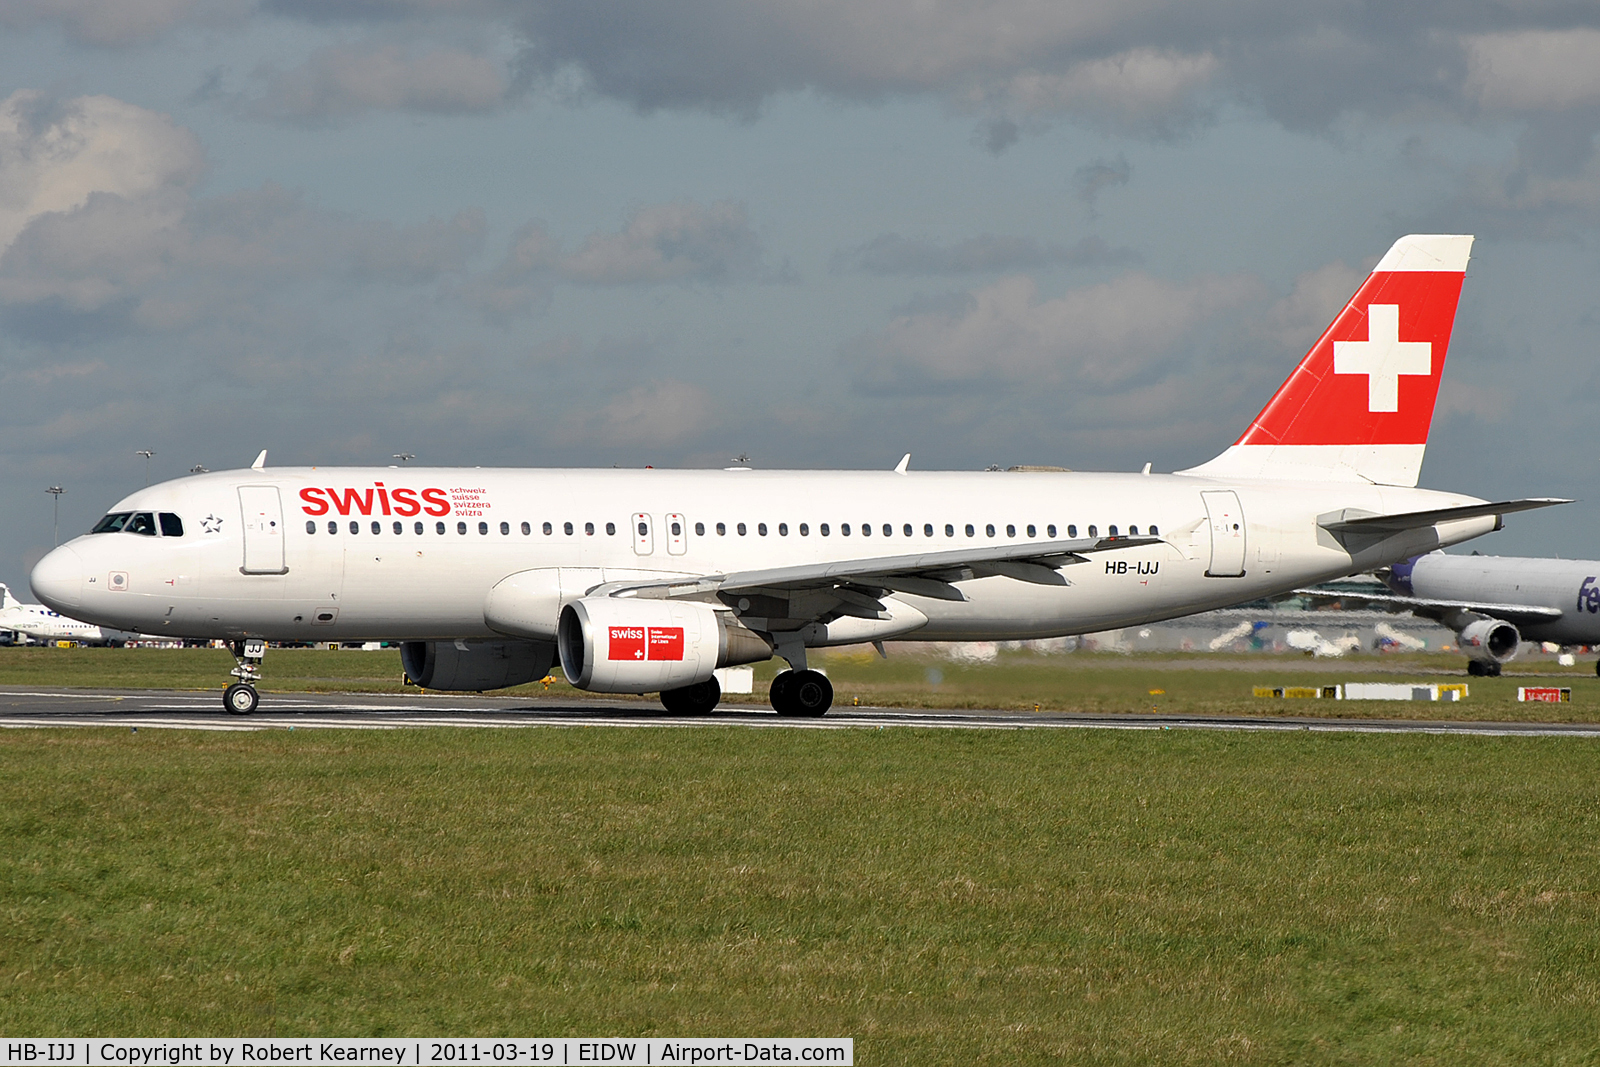 HB-IJJ, 1996 Airbus A320-214 C/N 585, Lining up r/w 28